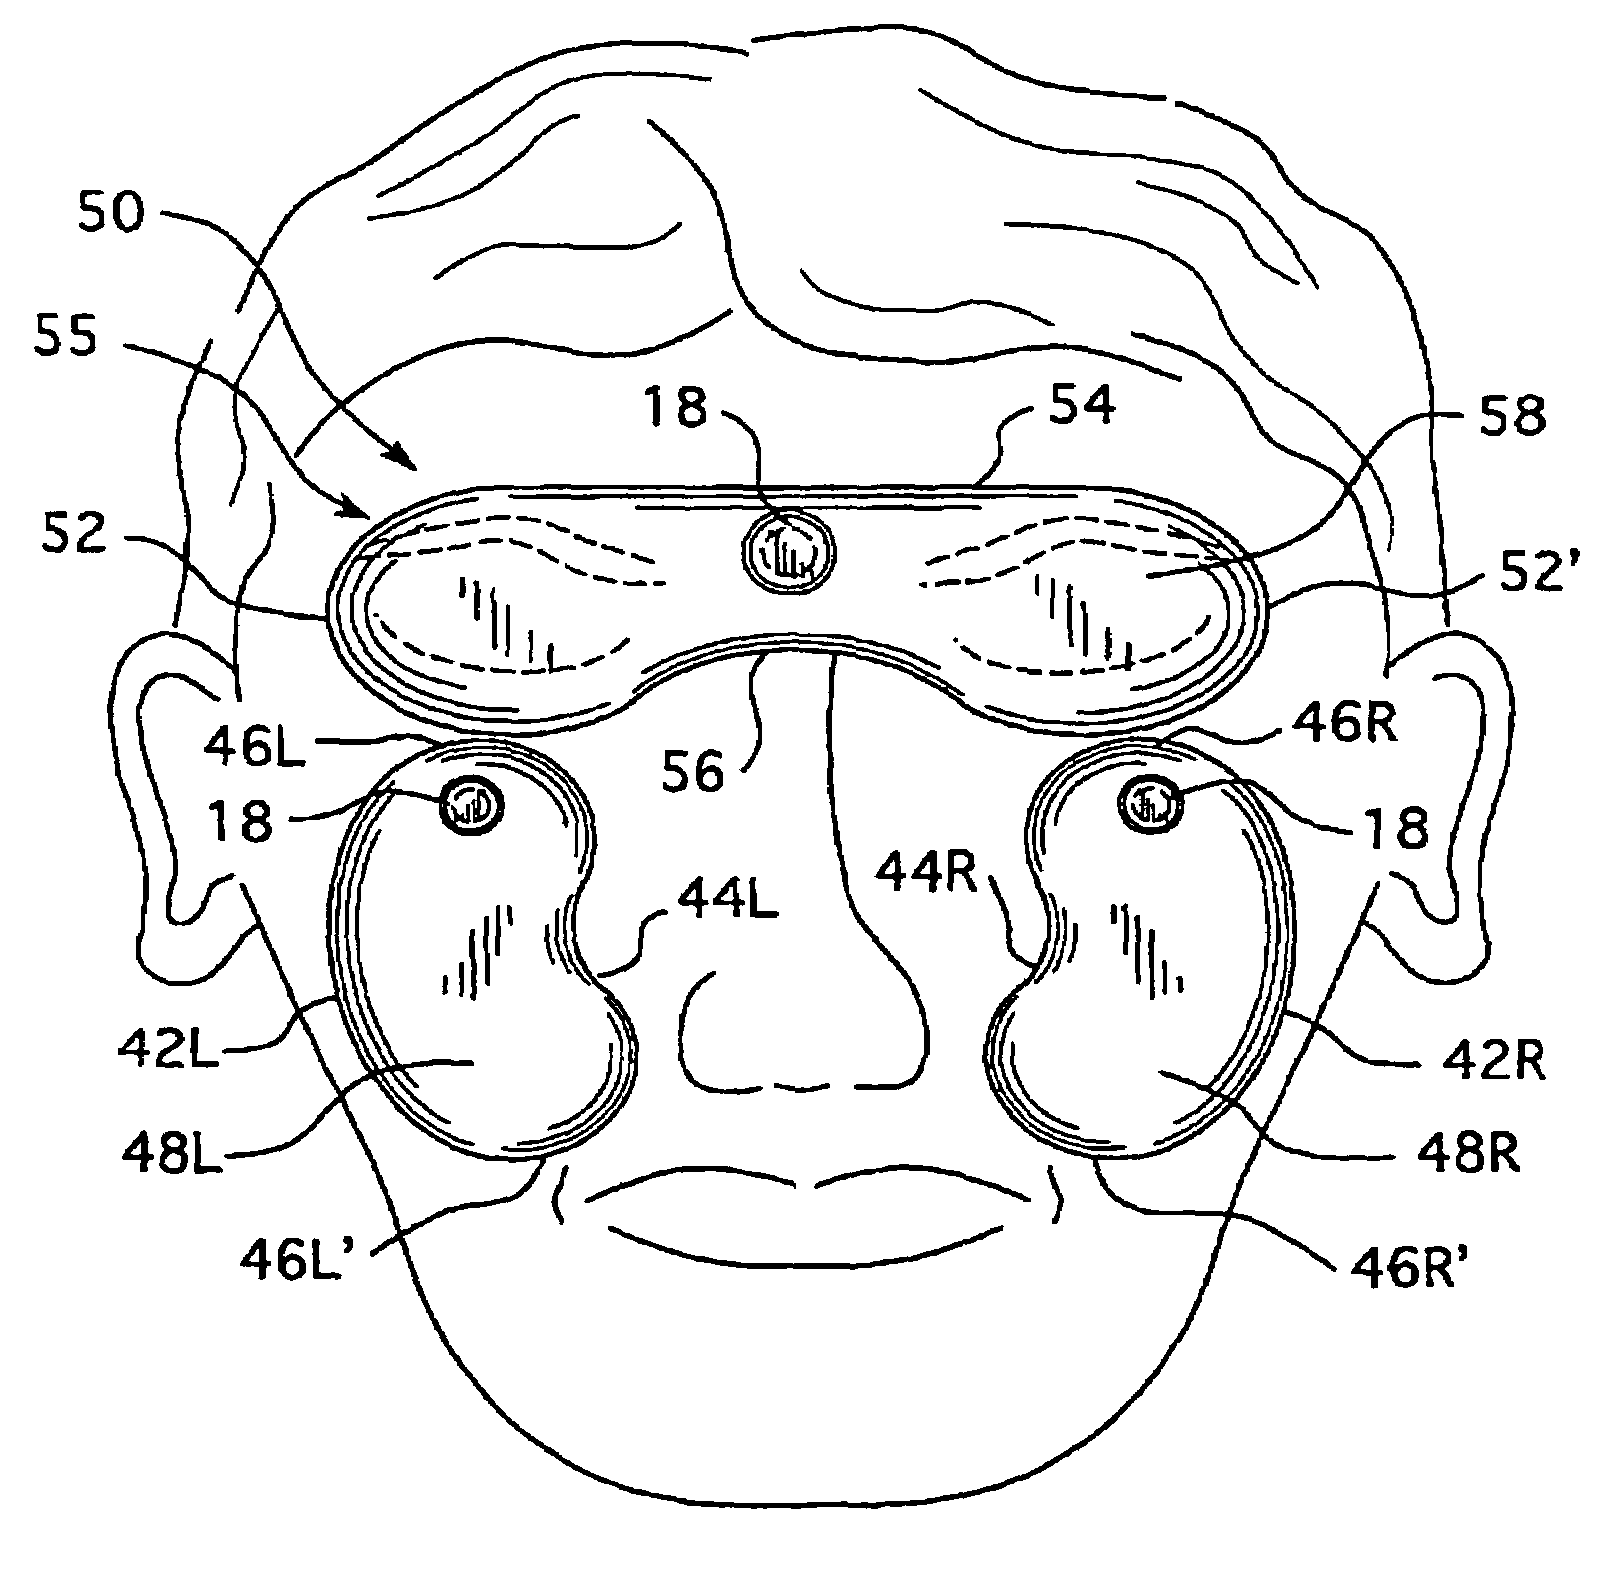 Method of embalming with sand-filled weights